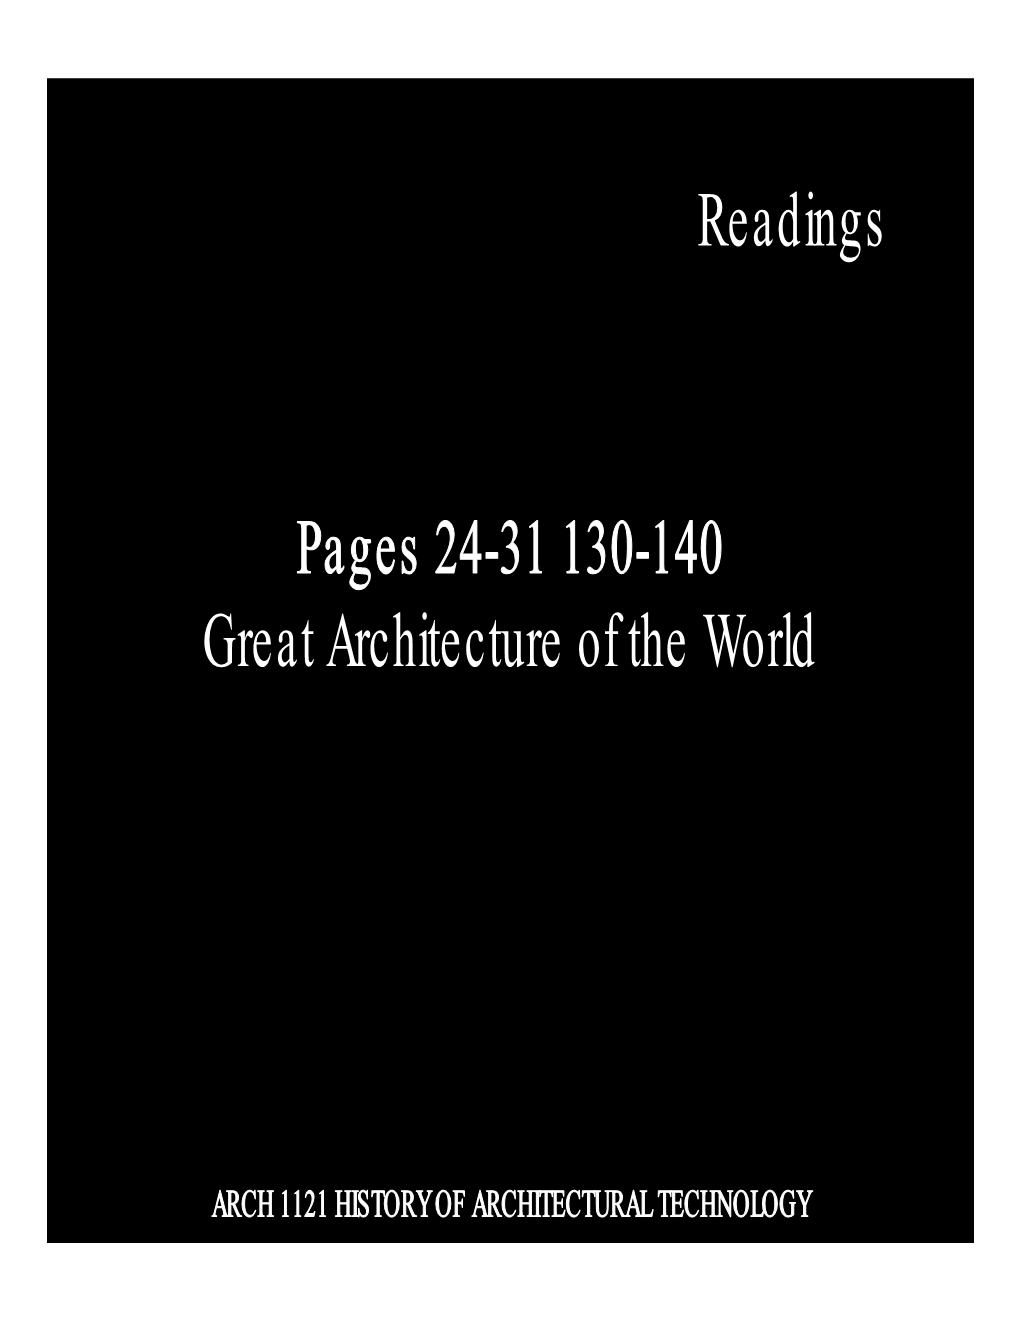 Pages 24-31 130-140 Great Architecture of the World Readings